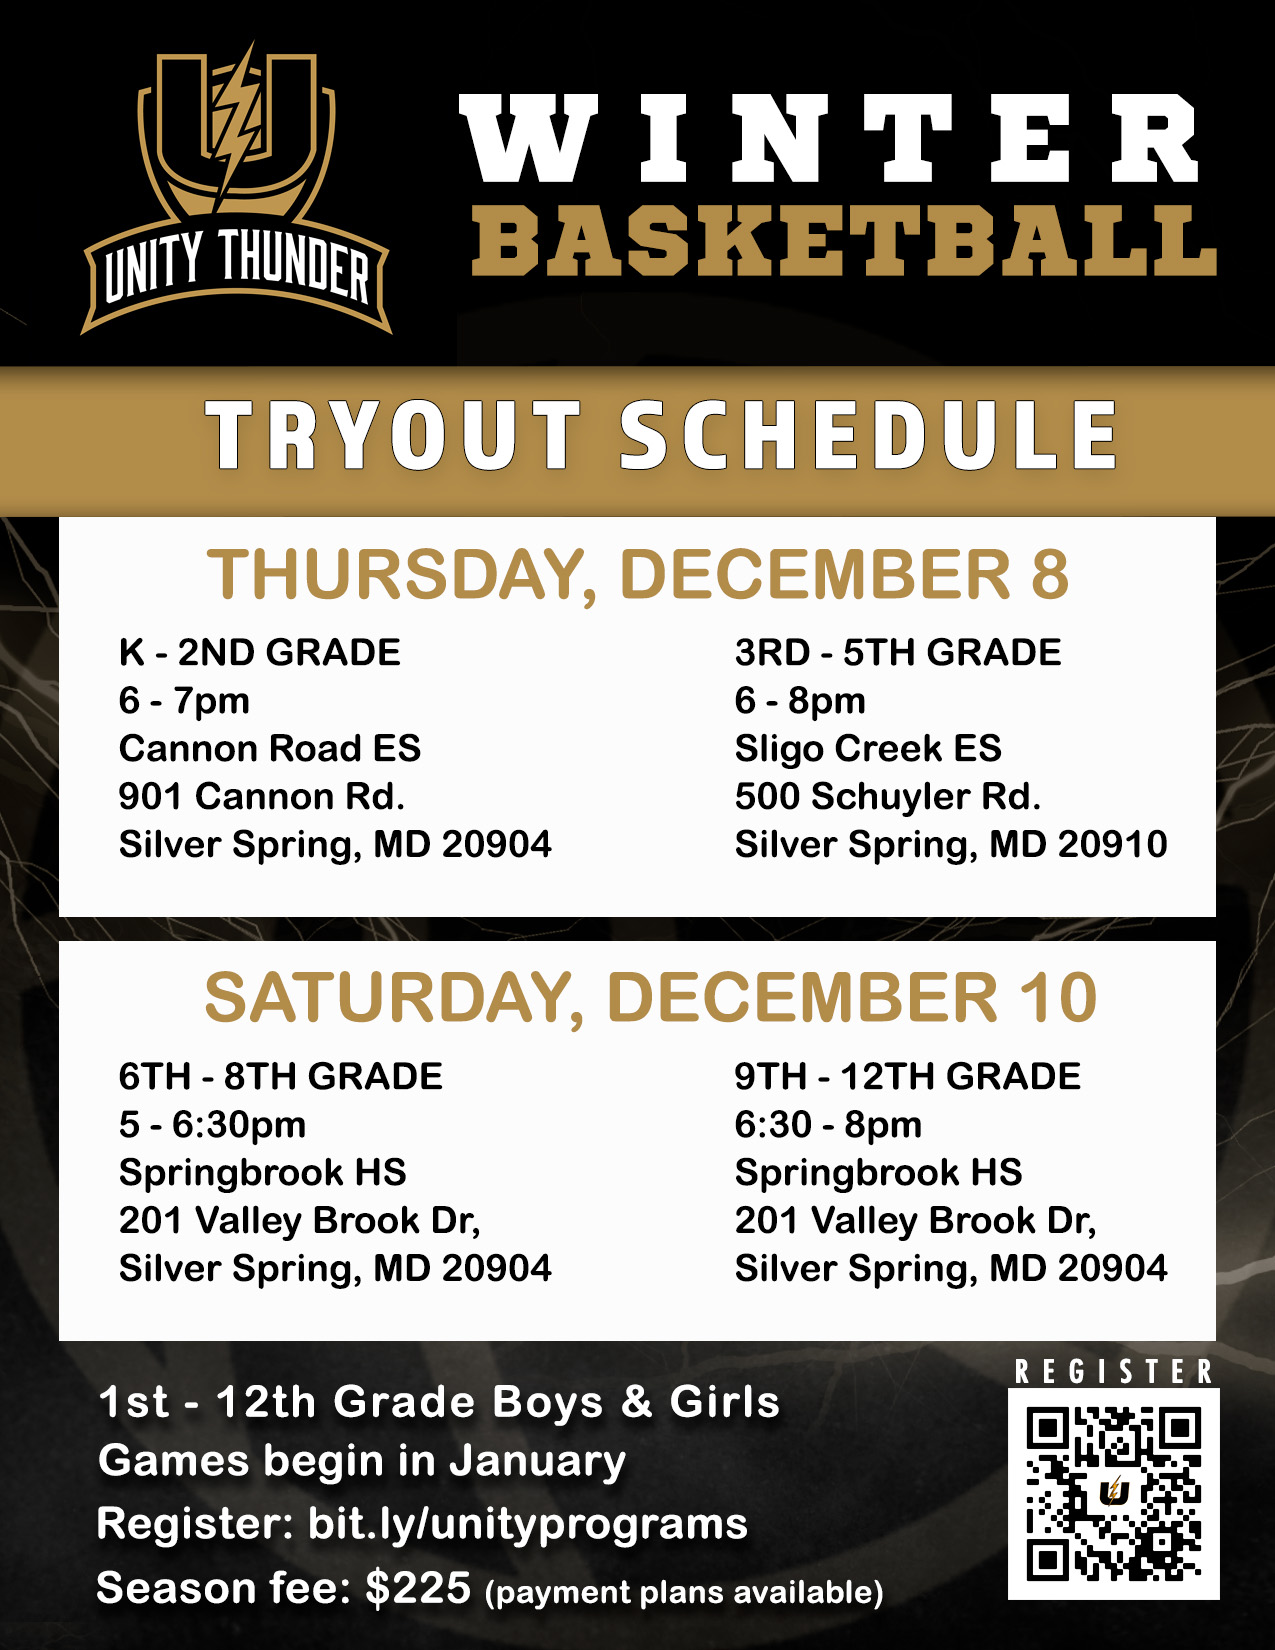 UNITY Thunder Winter Basketball Tryout Schedule